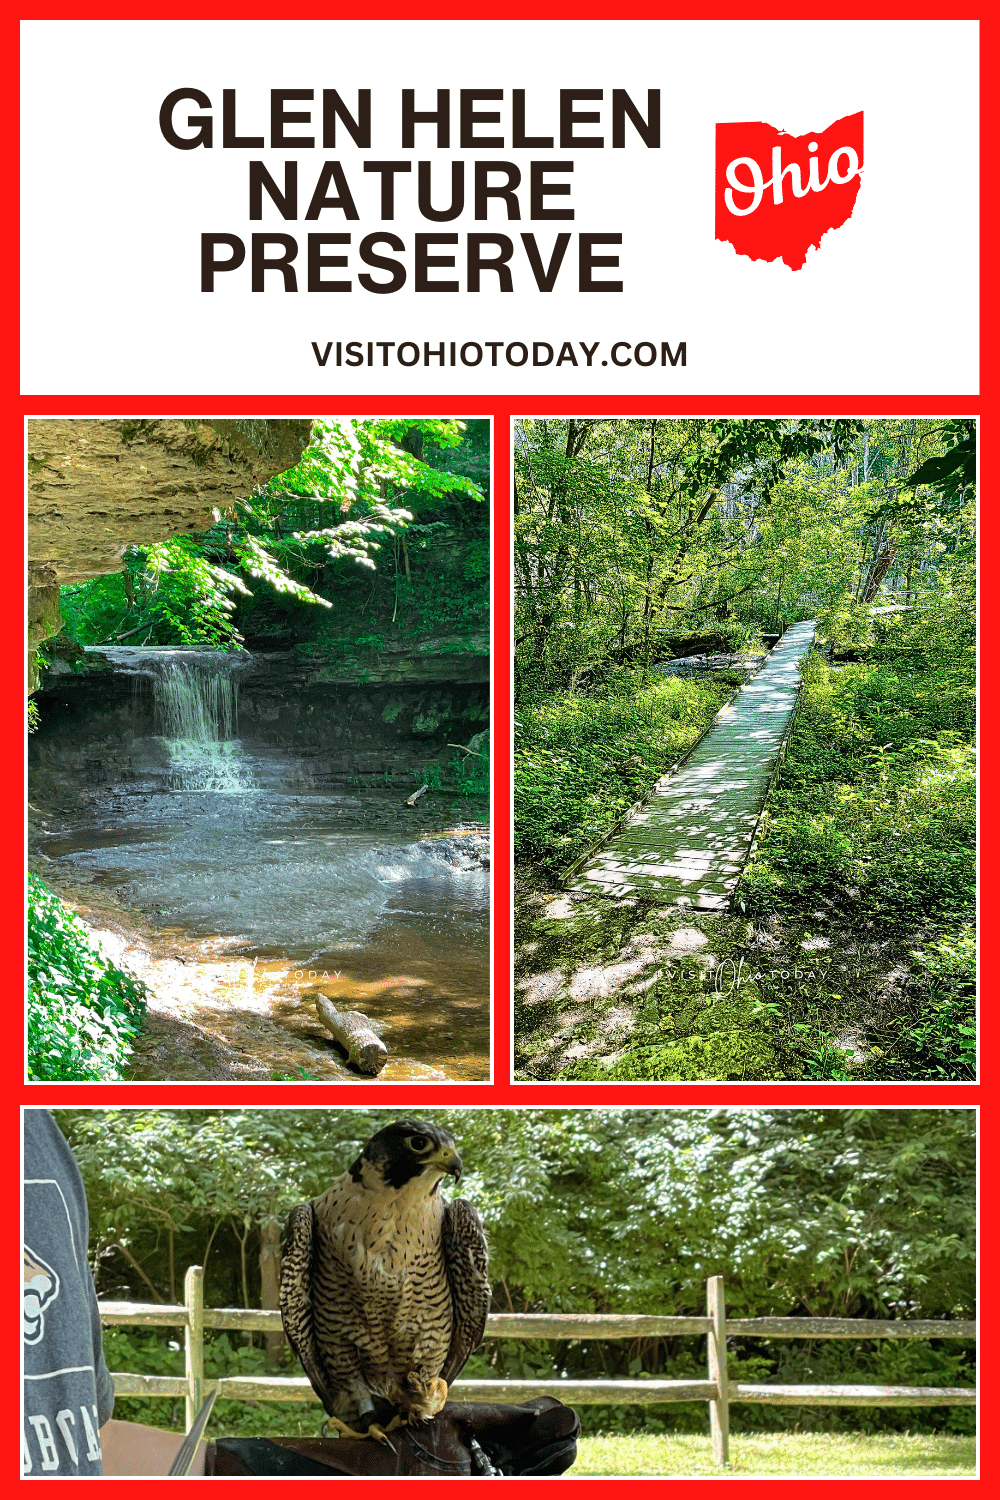 Glen Helen Nature Preserve is immediately east of Yellow Springs, Ohio. It is the largest private nature preserve in the region. As well as being stunningly beautiful, there is a lot to do at Glen Helen. The 'Yellow Spring' that gives the town it's name can be found here.